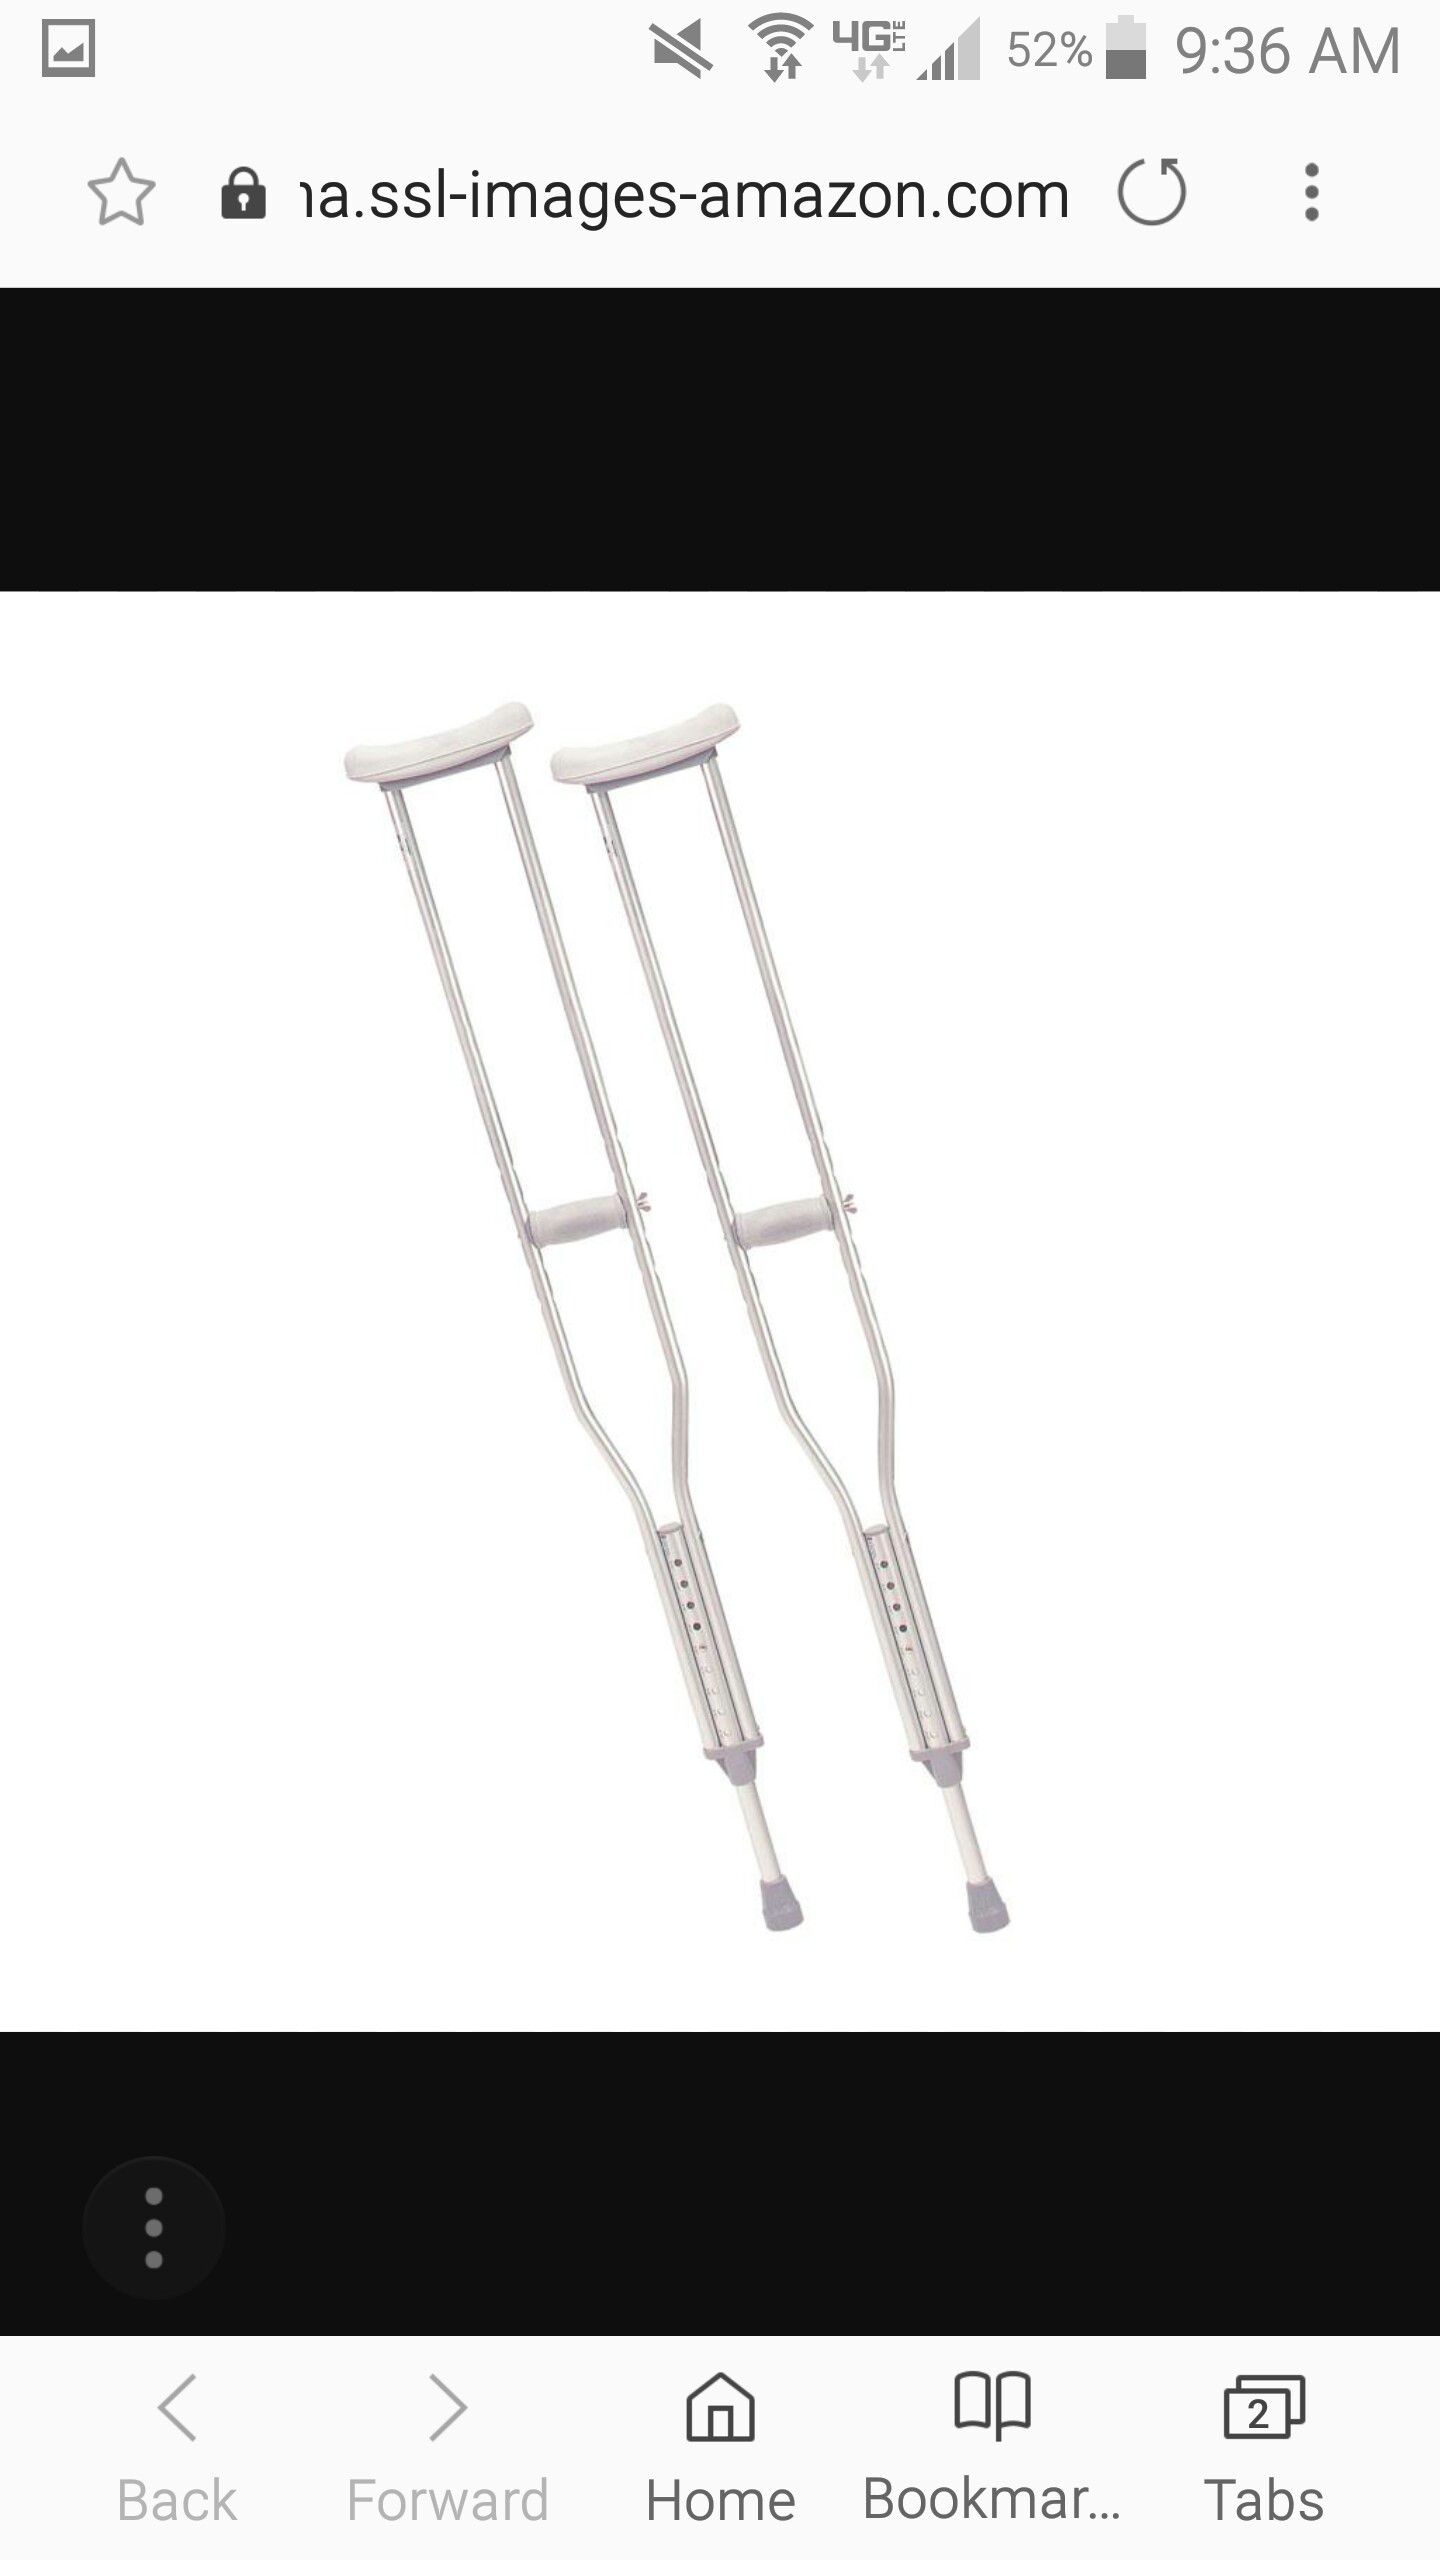 Crutches tall adult Drive Medical. Seat and first aid items free